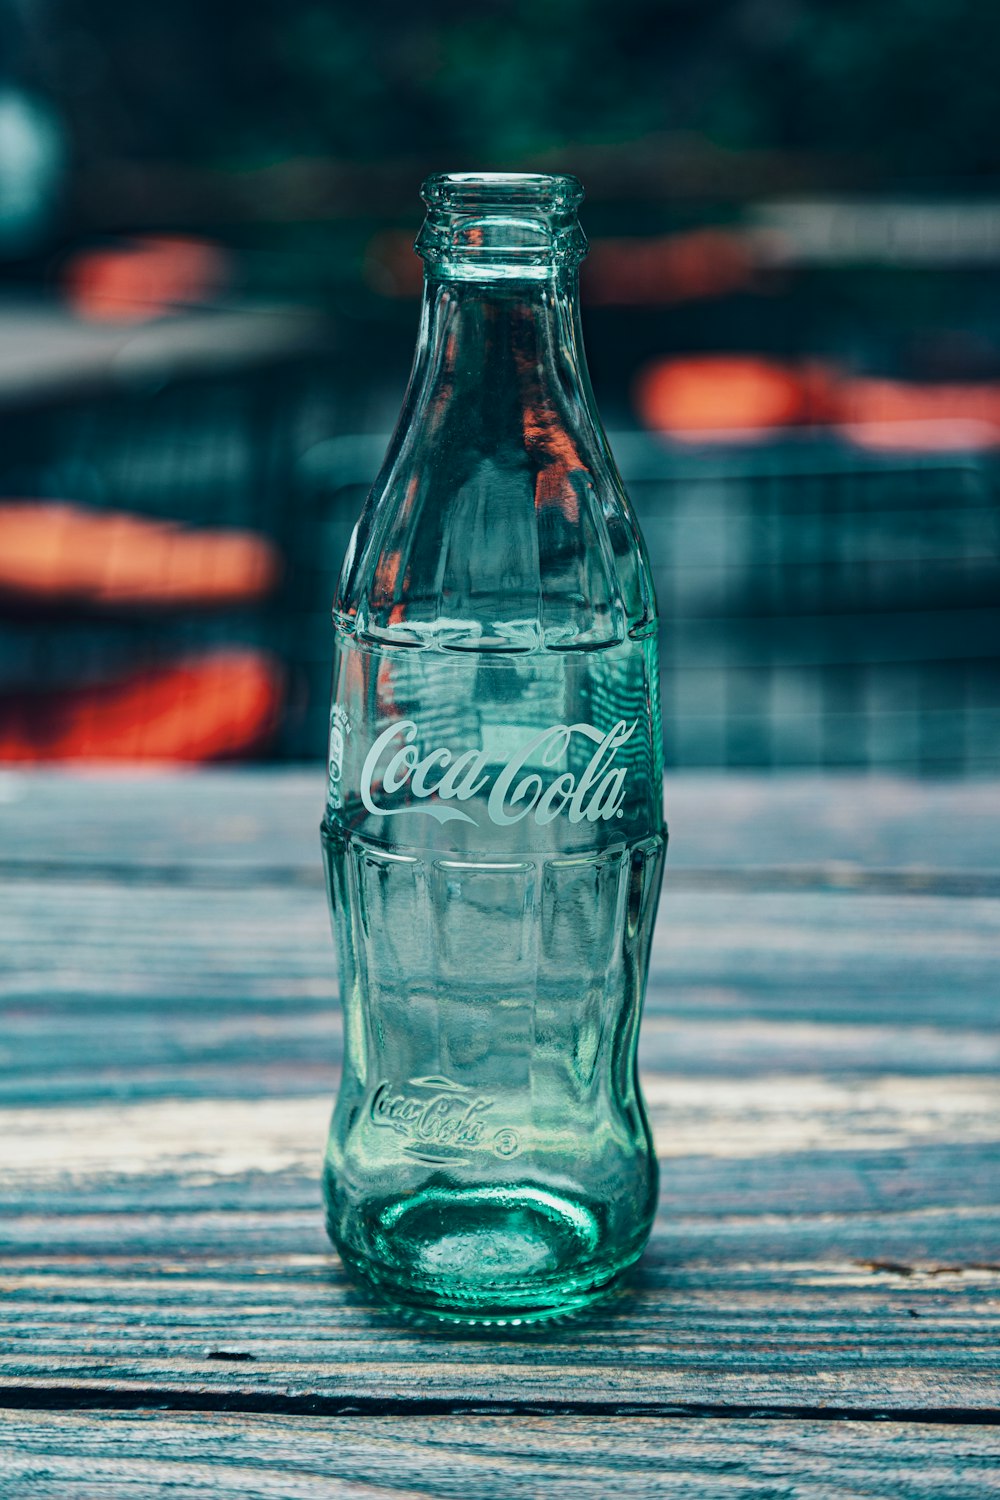 Coca-Cola glass bottle on wooden surface